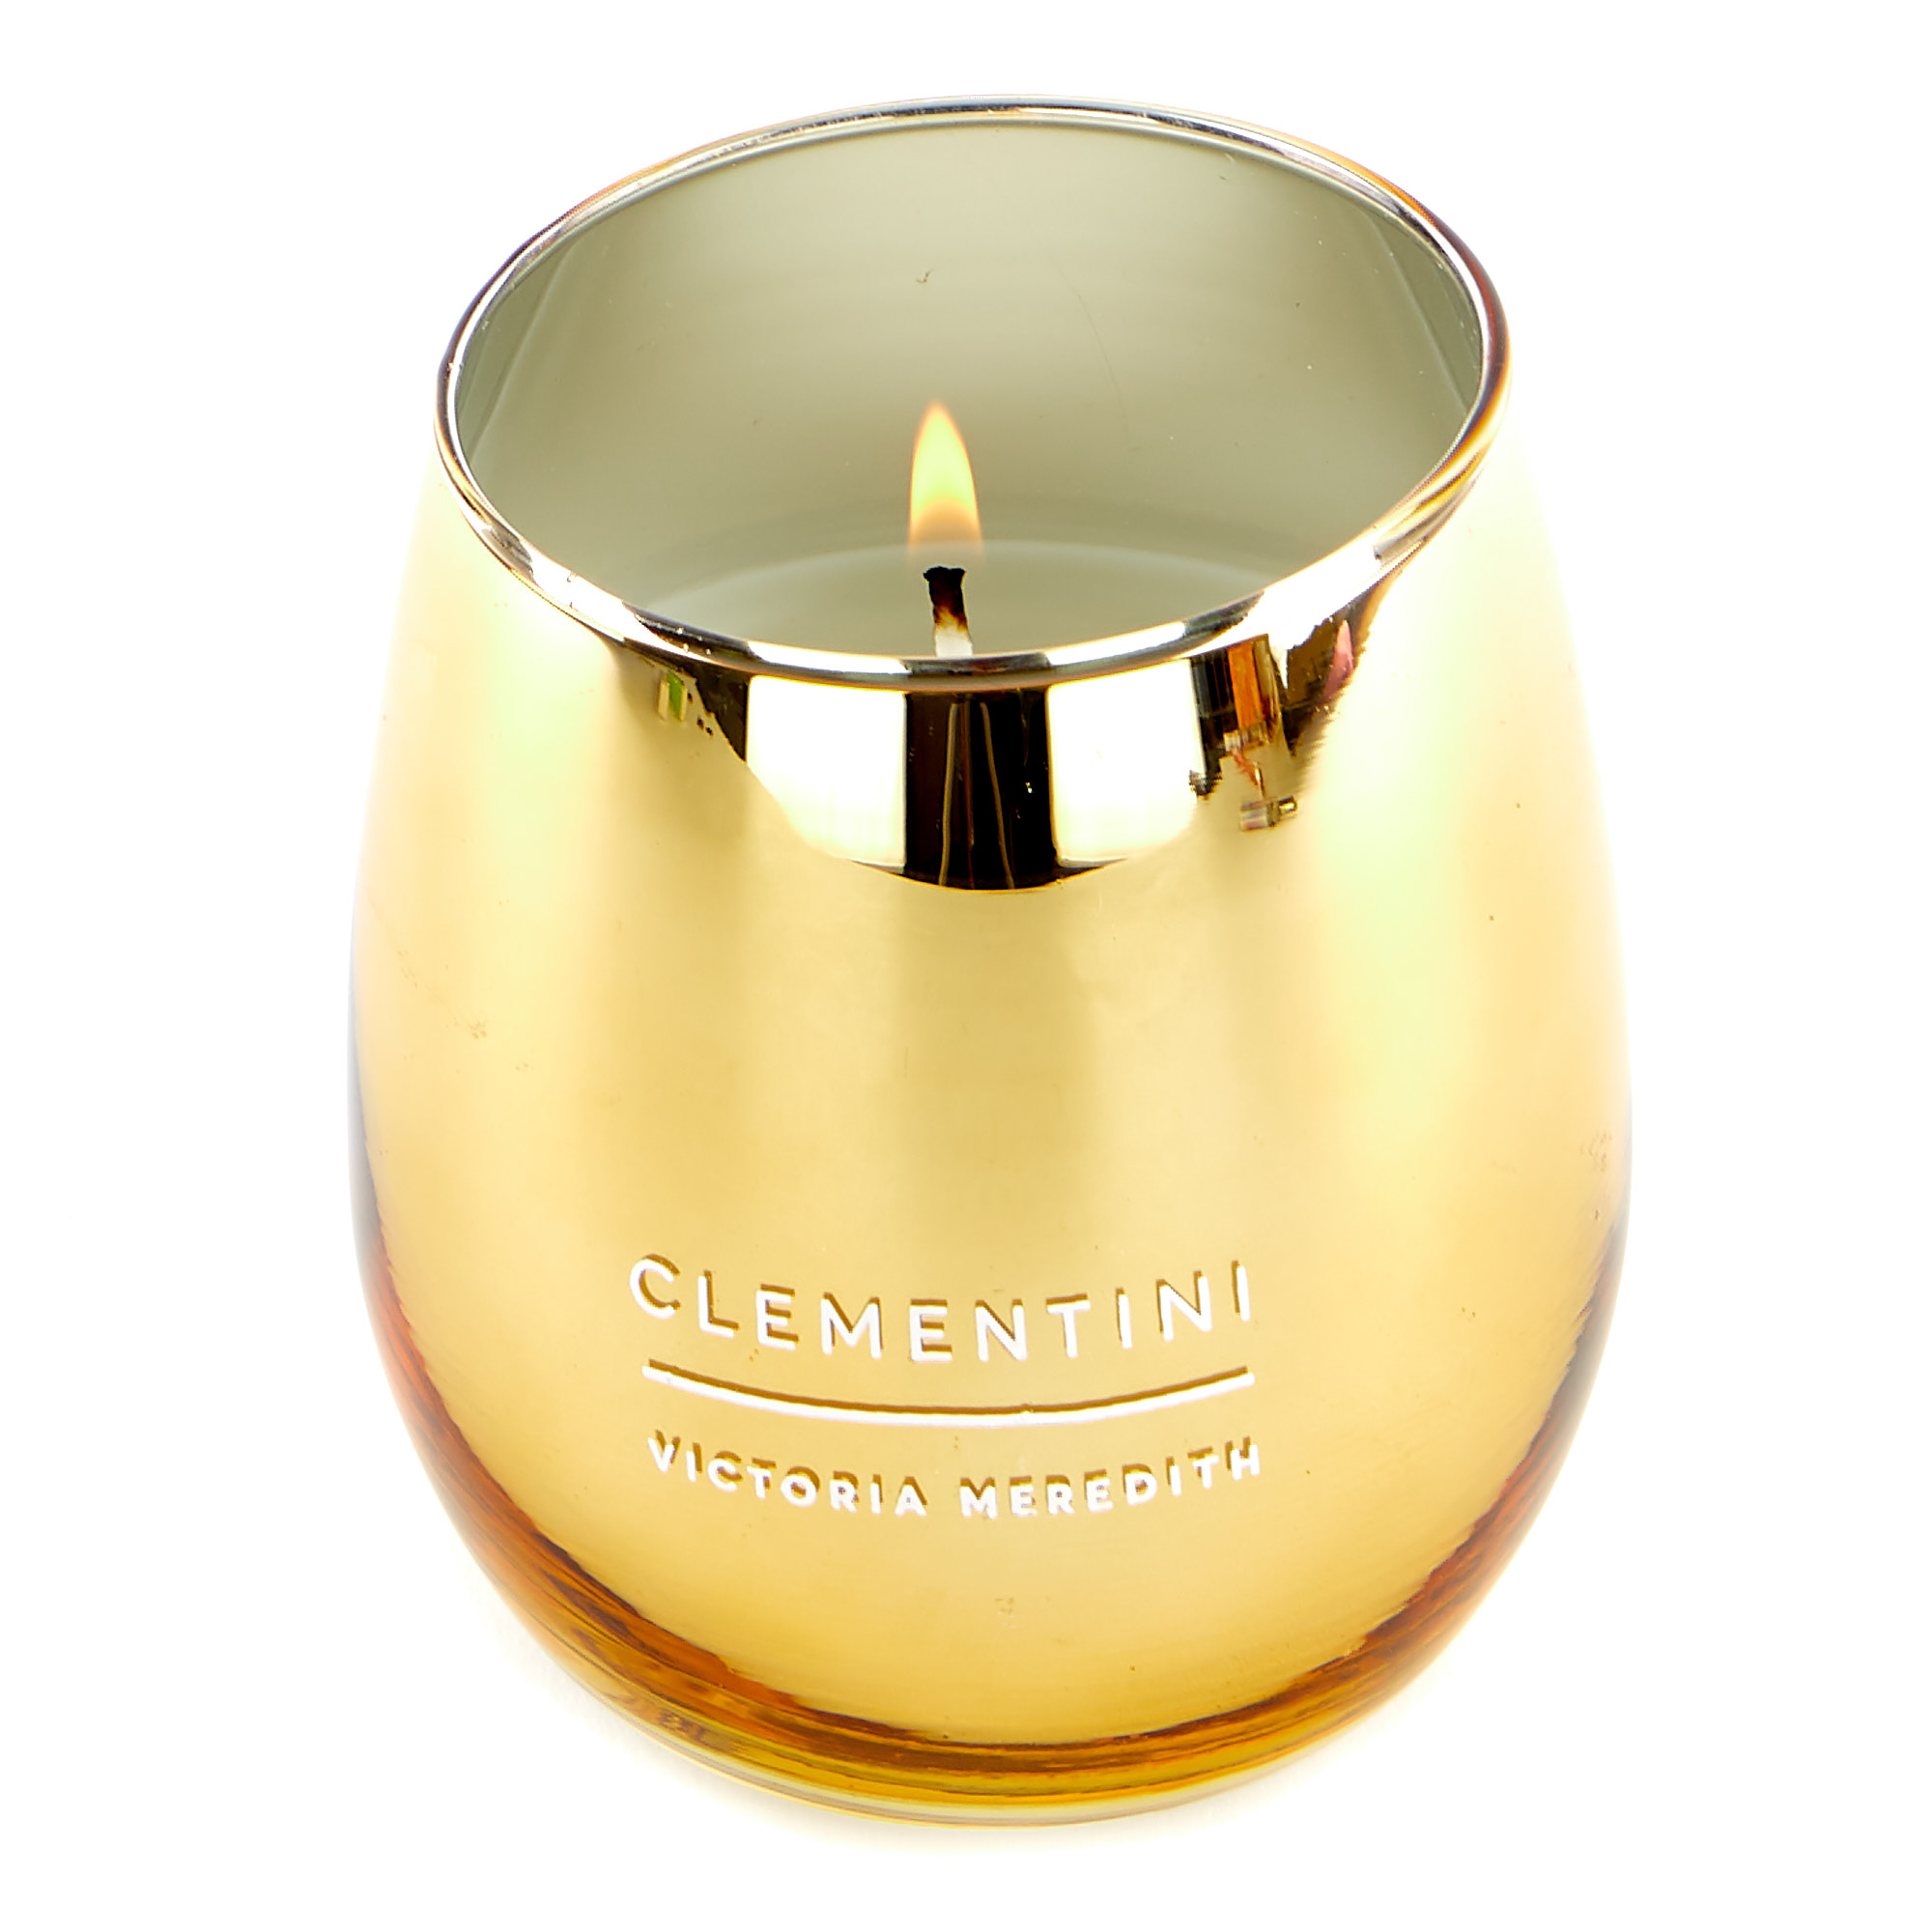 Victoria Meredith Clementini Scented Candle